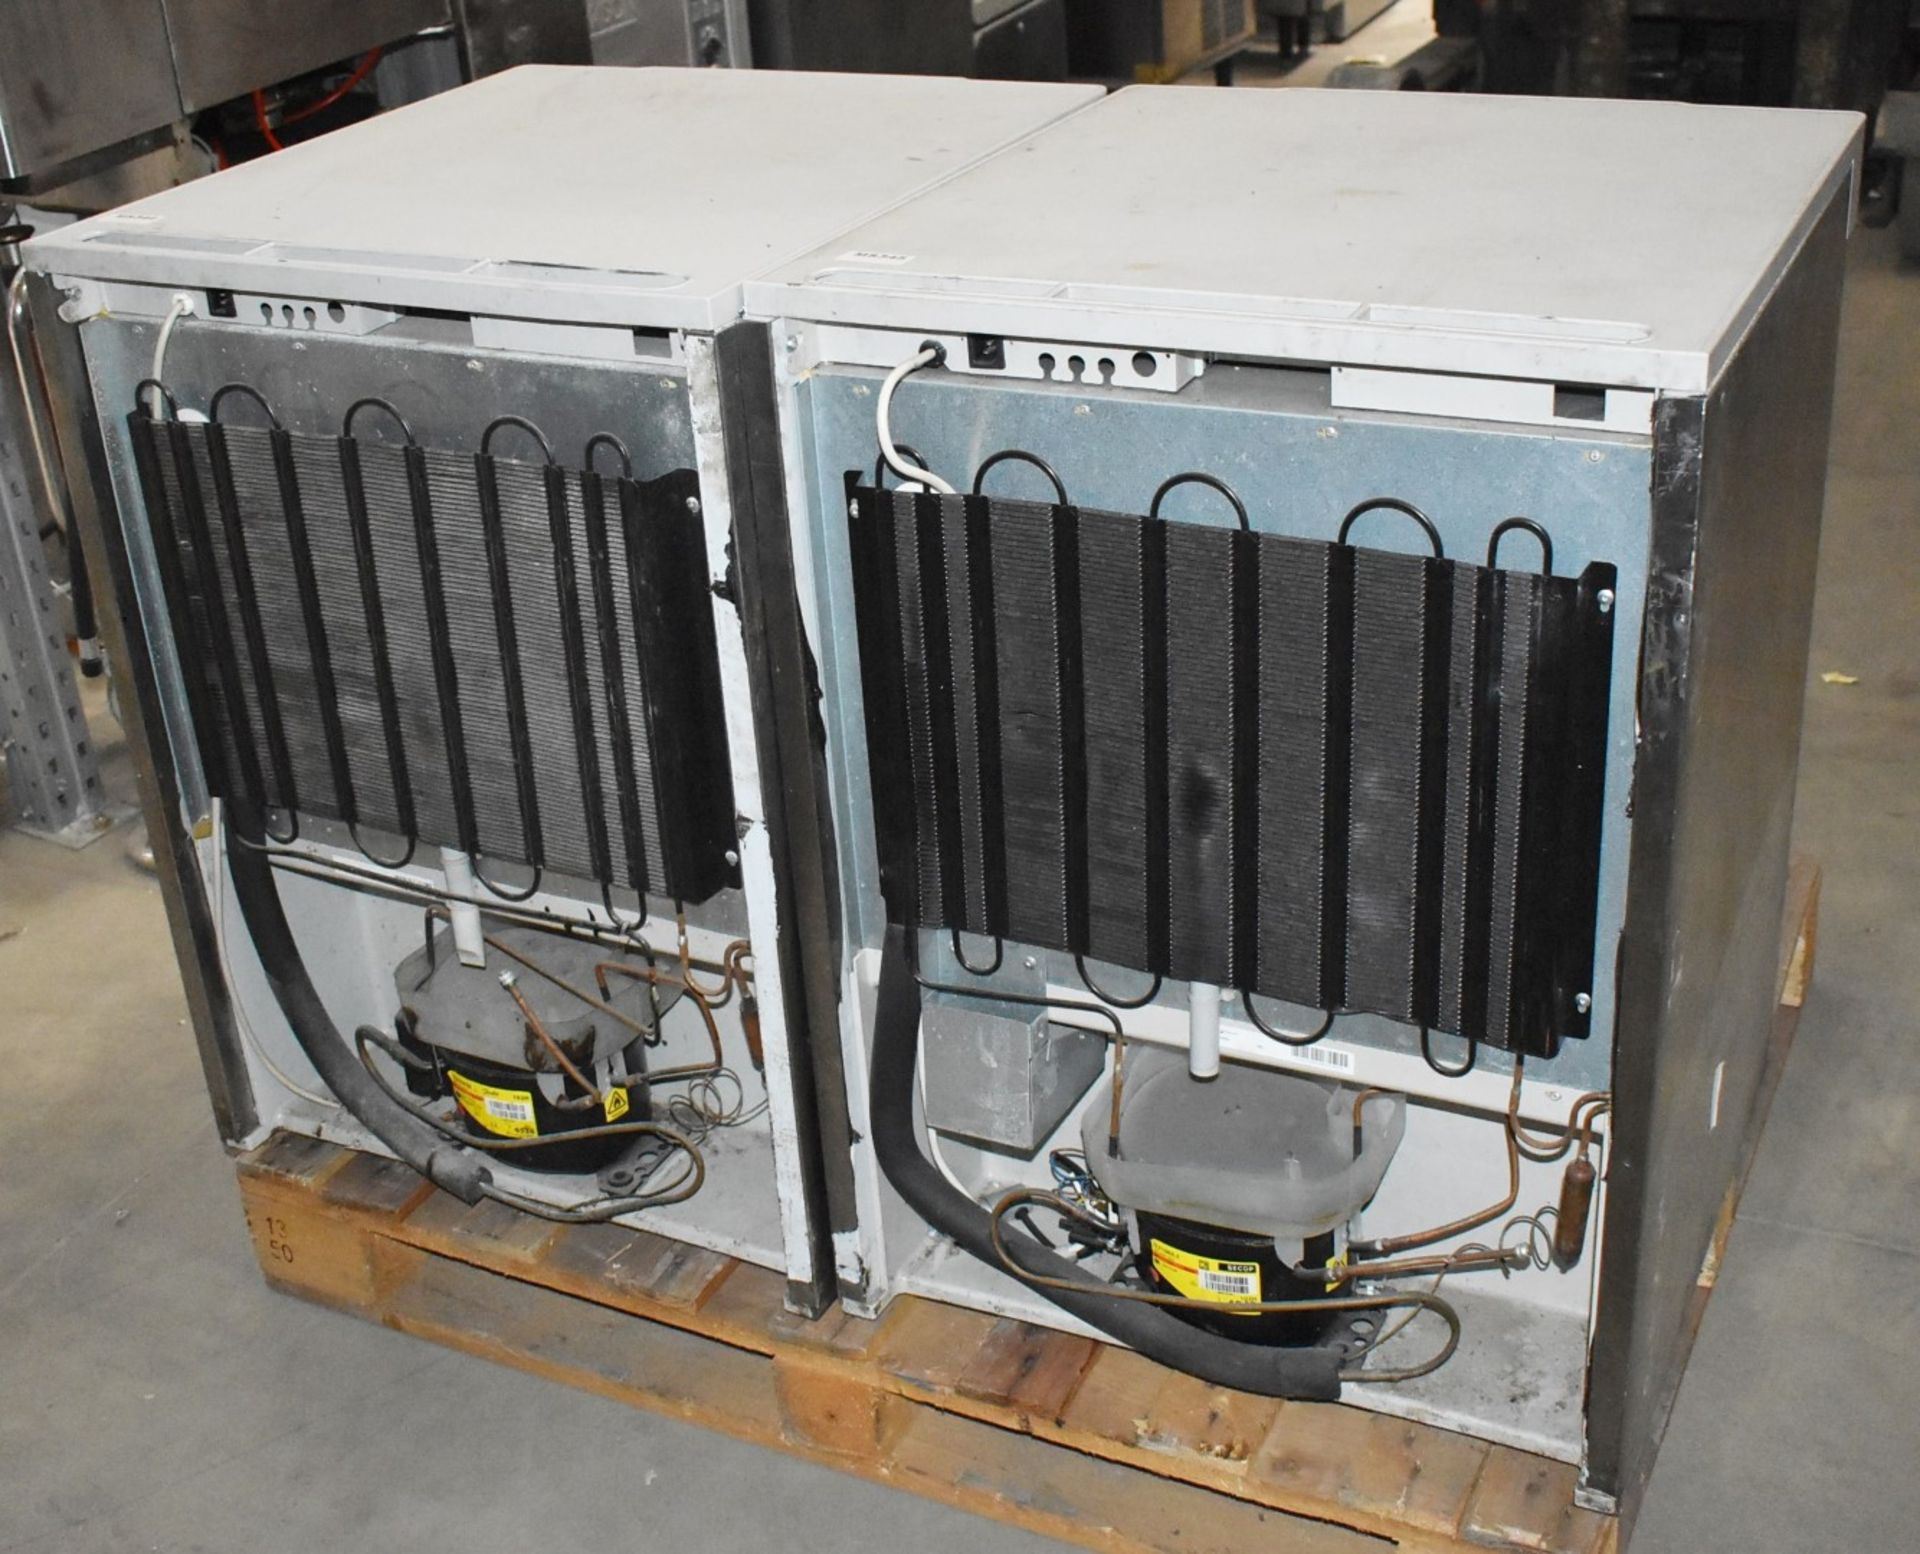 2 x Gram F 210 RG 3N 125 Ltr Undercounter Freezers - Recently Removed From a Restaurant - Image 2 of 8